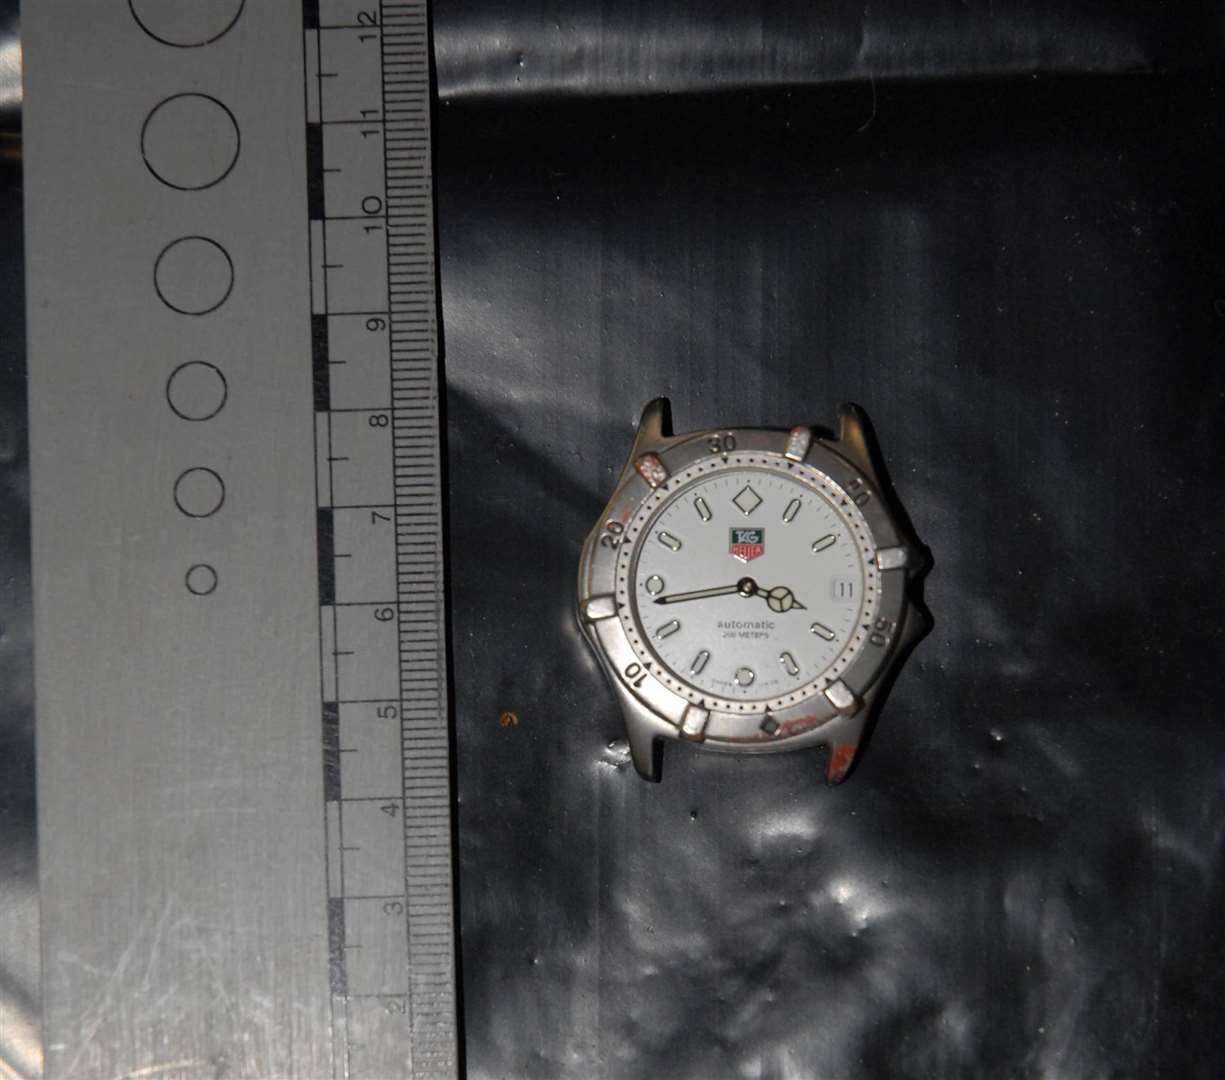 A piece of the broken Tag Heuer watch that belonged to Guy Malbec and which was smashed during the violence. It was found by police in pieces in the Castle Street car park. Picture: CPS